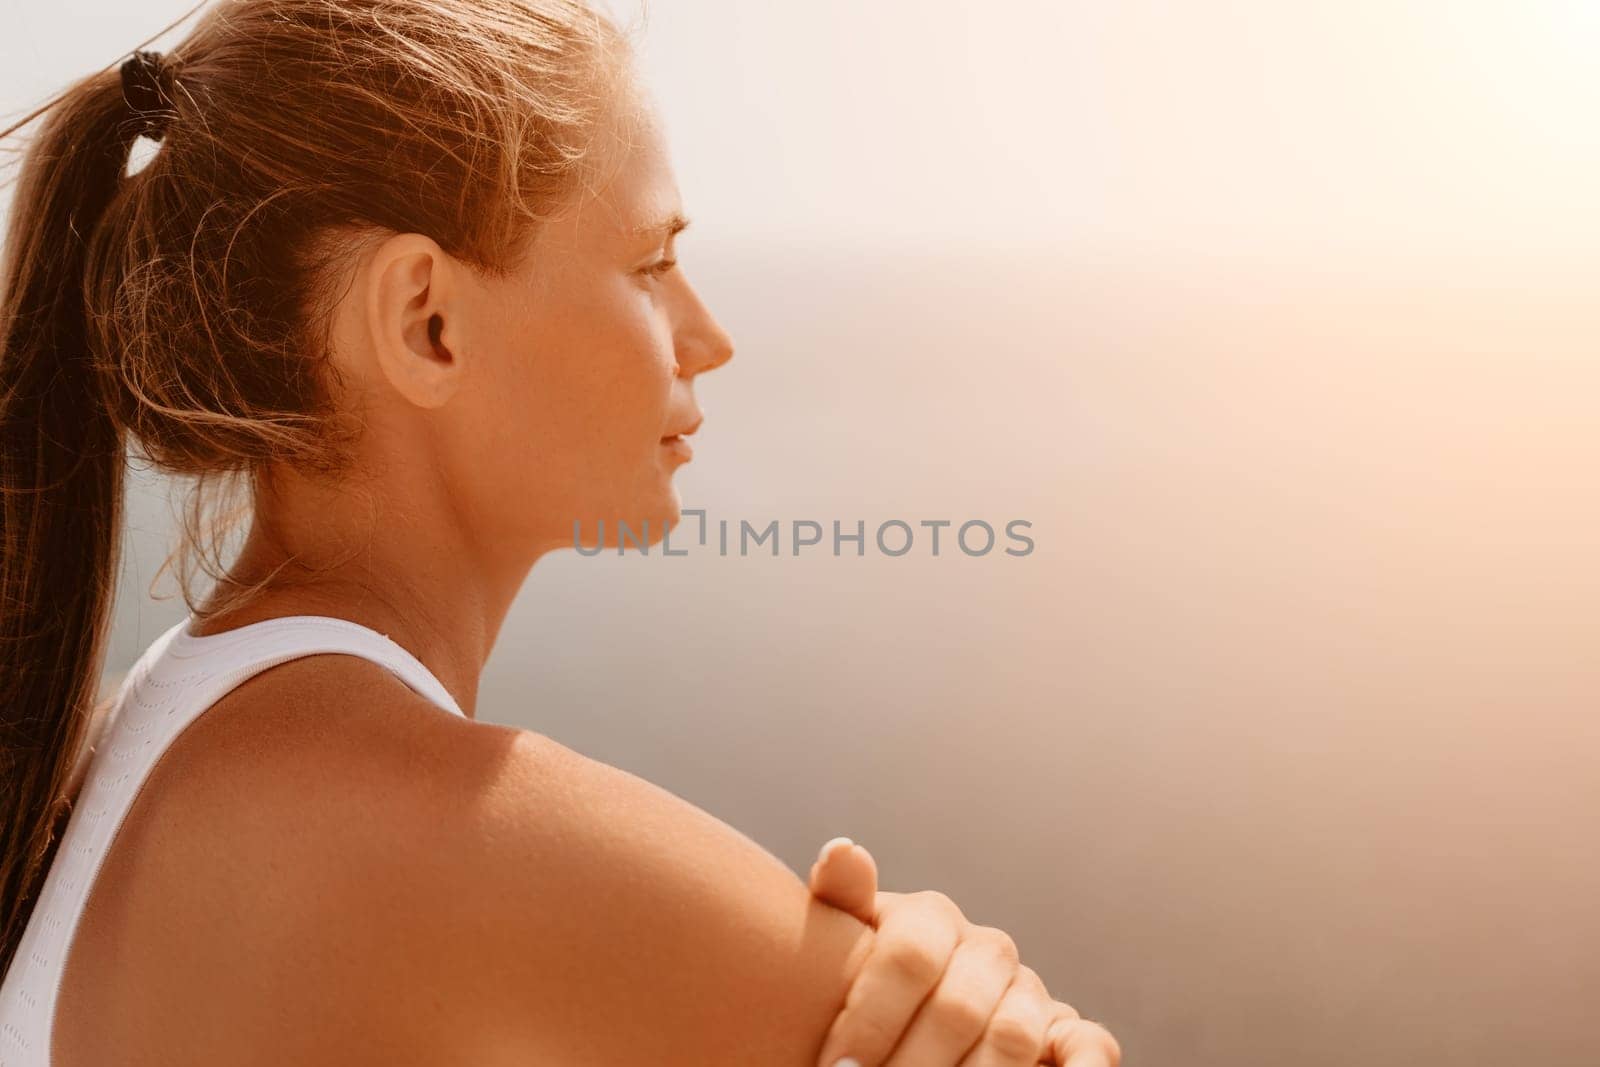 Woman sea pilates. Sporty middle-aged woman training in pilates on yoga mat by sea. concepts of health, wellness, and mindfulness in exercise, promoting the benefits of active and balanced lifestyle by panophotograph